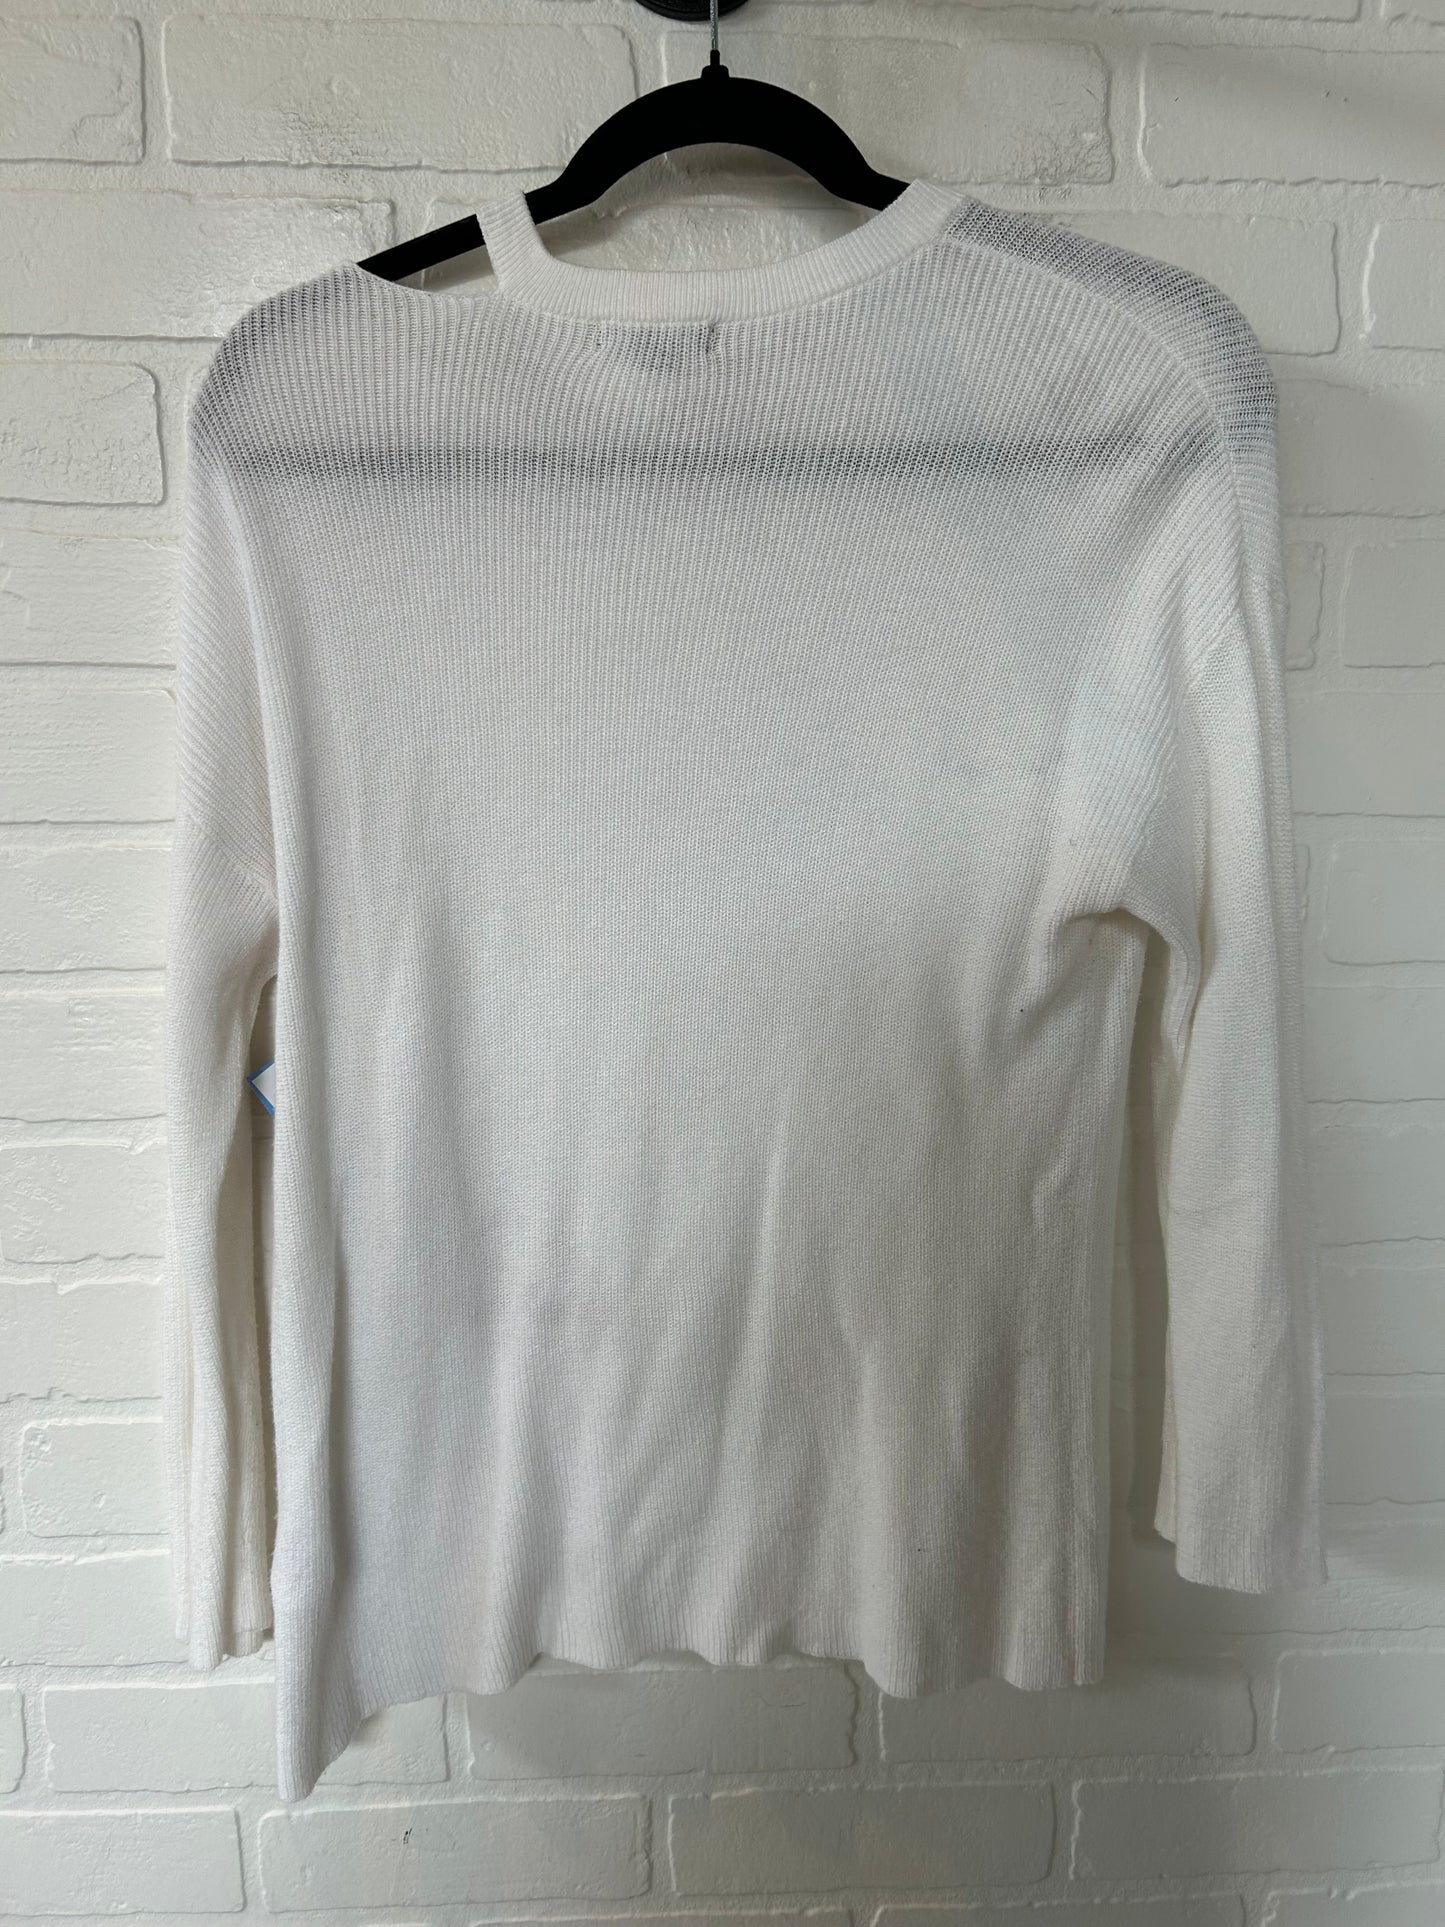 White Top Long Sleeve Halogen, Size S